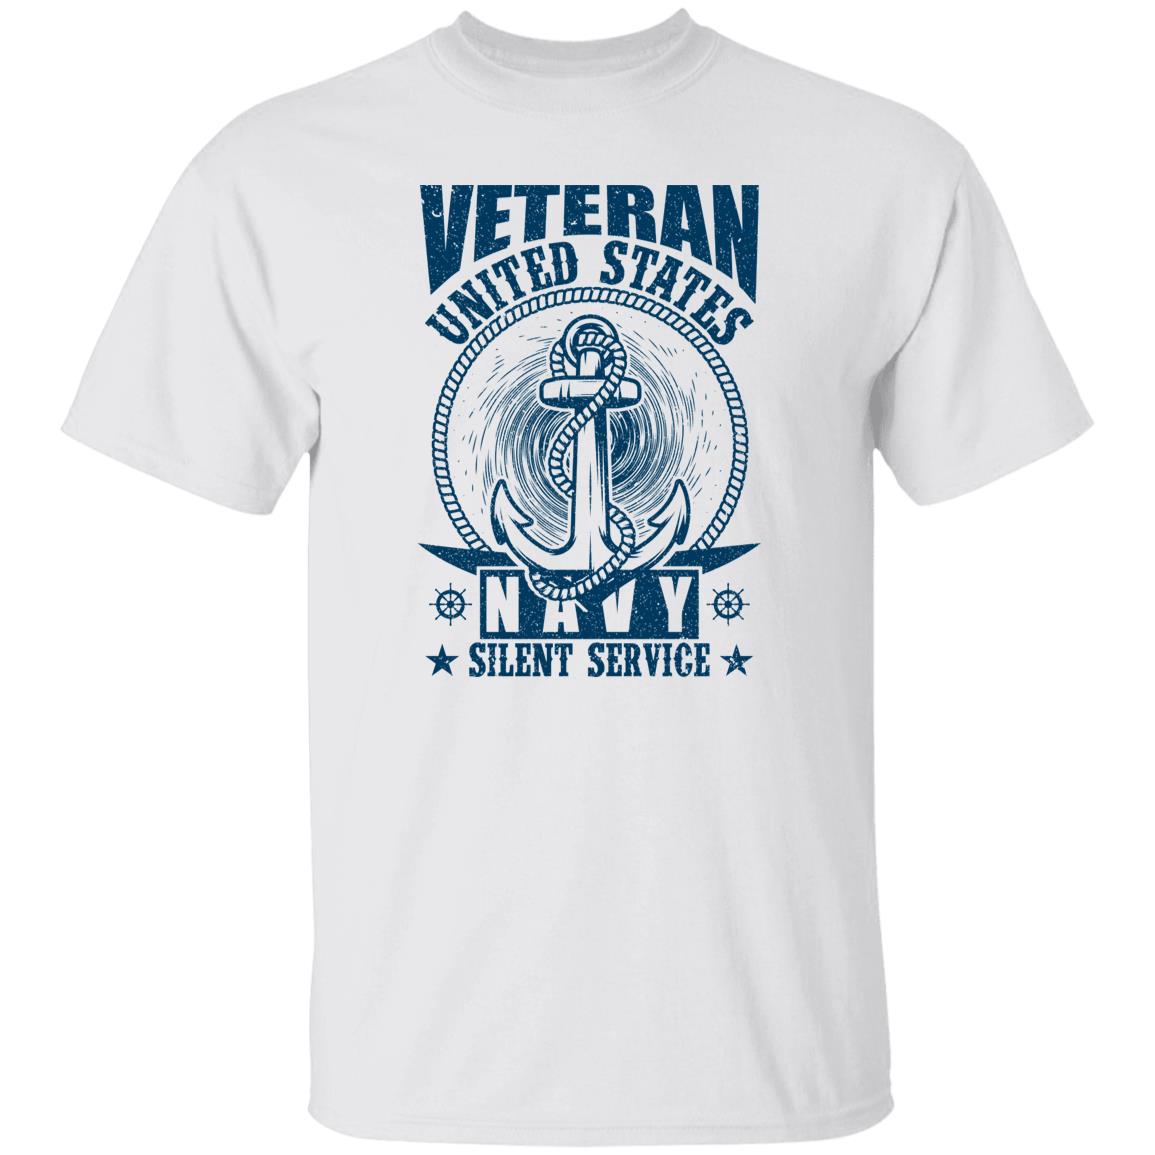 Veteran United States Navy Tee Silent Service Gift Shirt for Navy